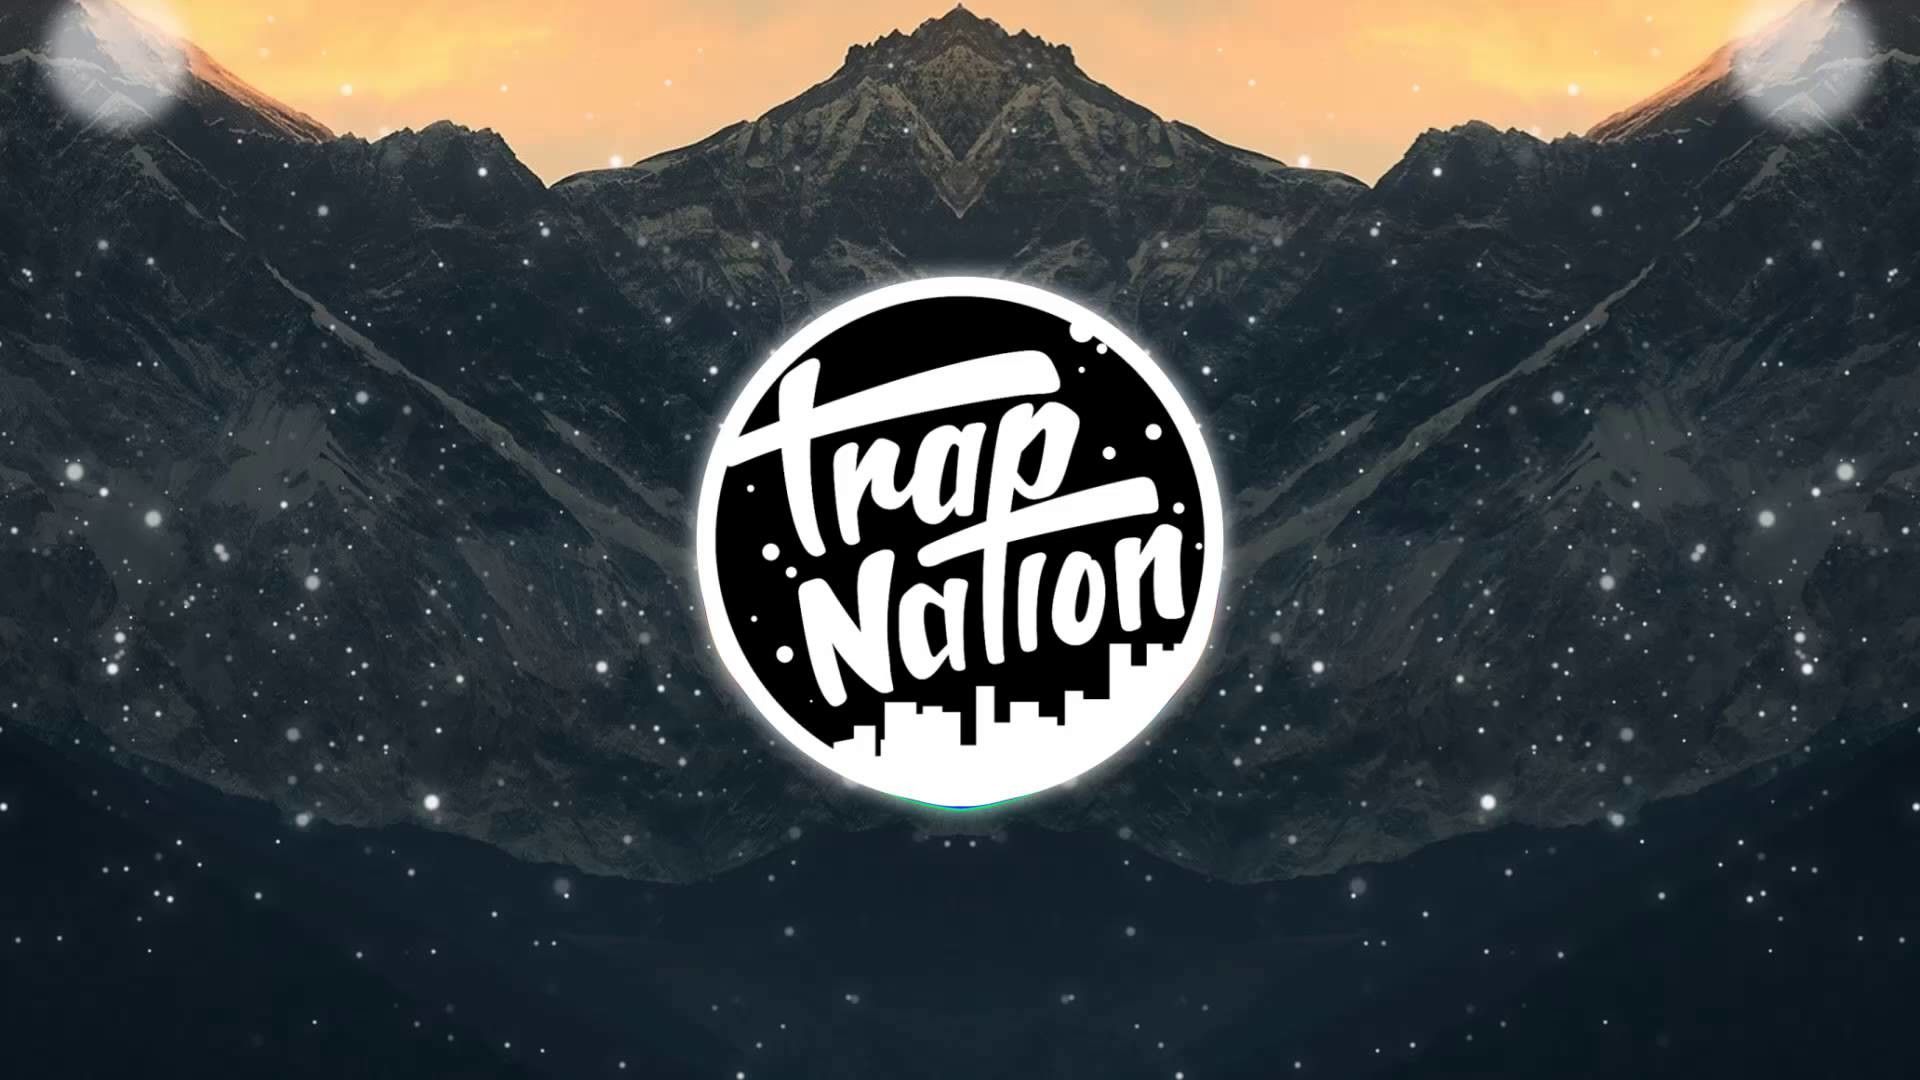 Trap Nation Wallpapers